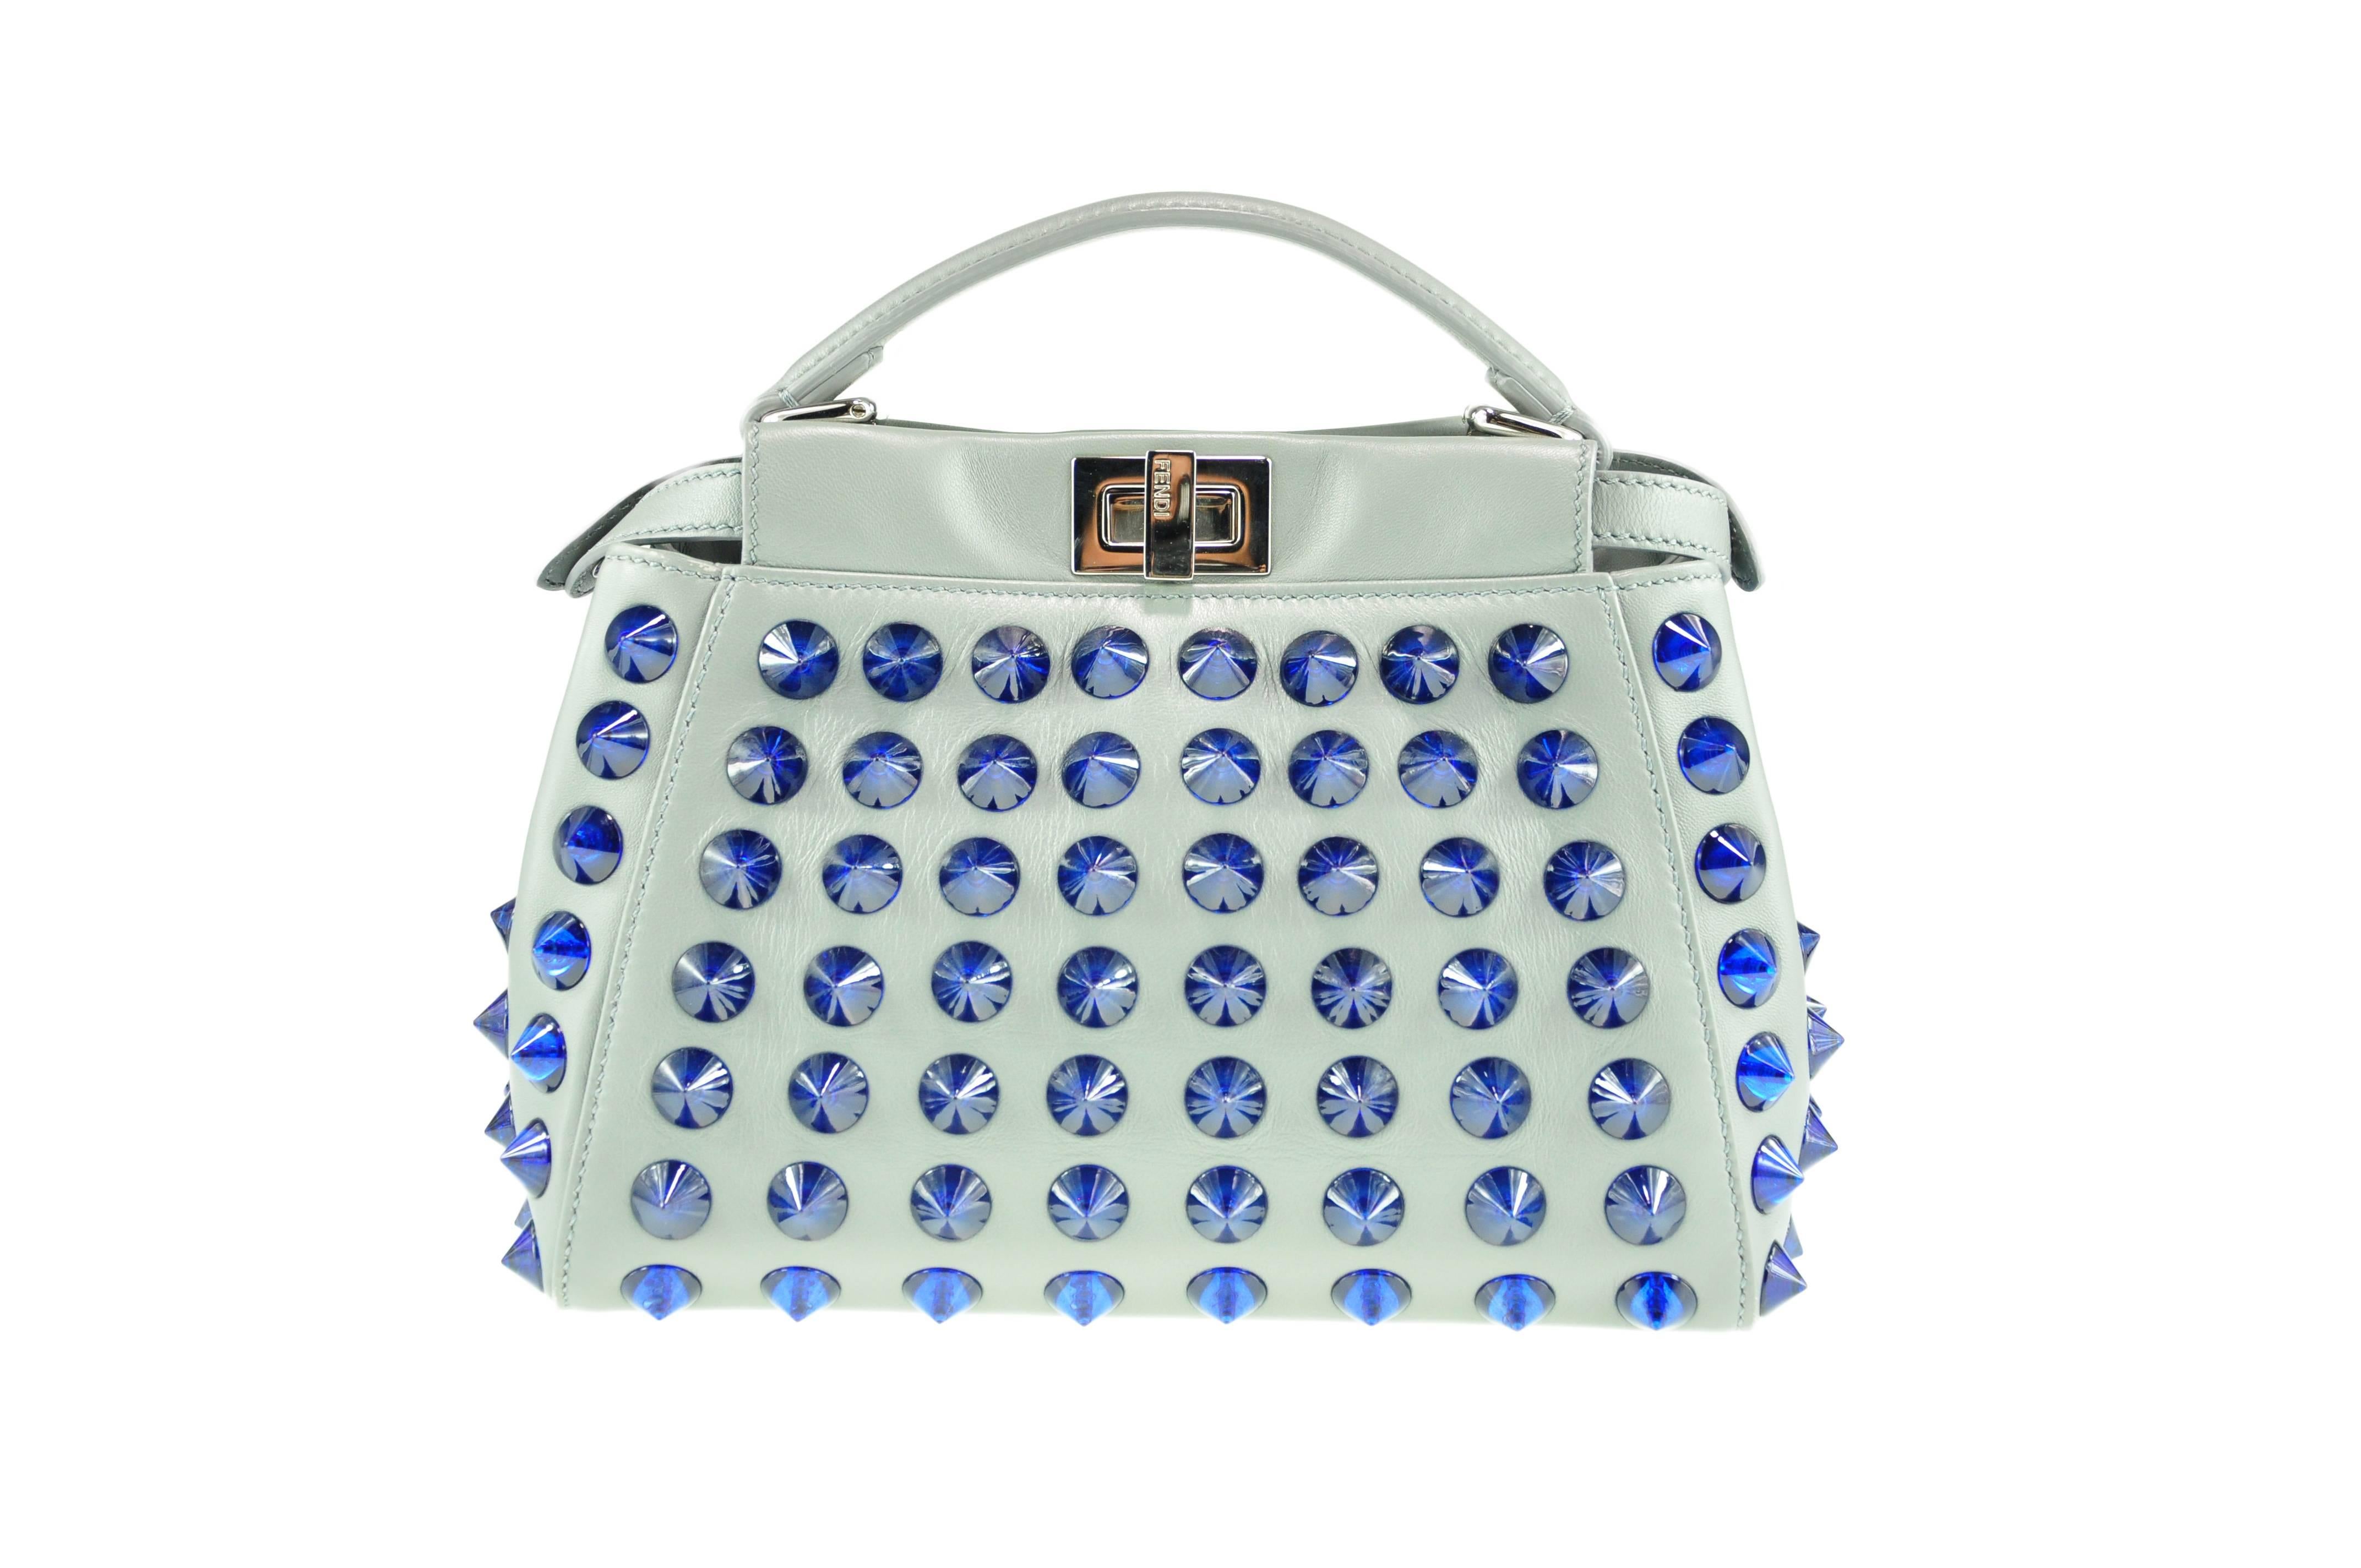 A most coveted Fendi mini Peekaboo in grey smooth nappa leather with cobalt conical studs.  Silver tone hardware, two compartments, one interior slip pocket and zip pocket.  Flat leather top handle, adjustable and detachable shoulder strap, turn